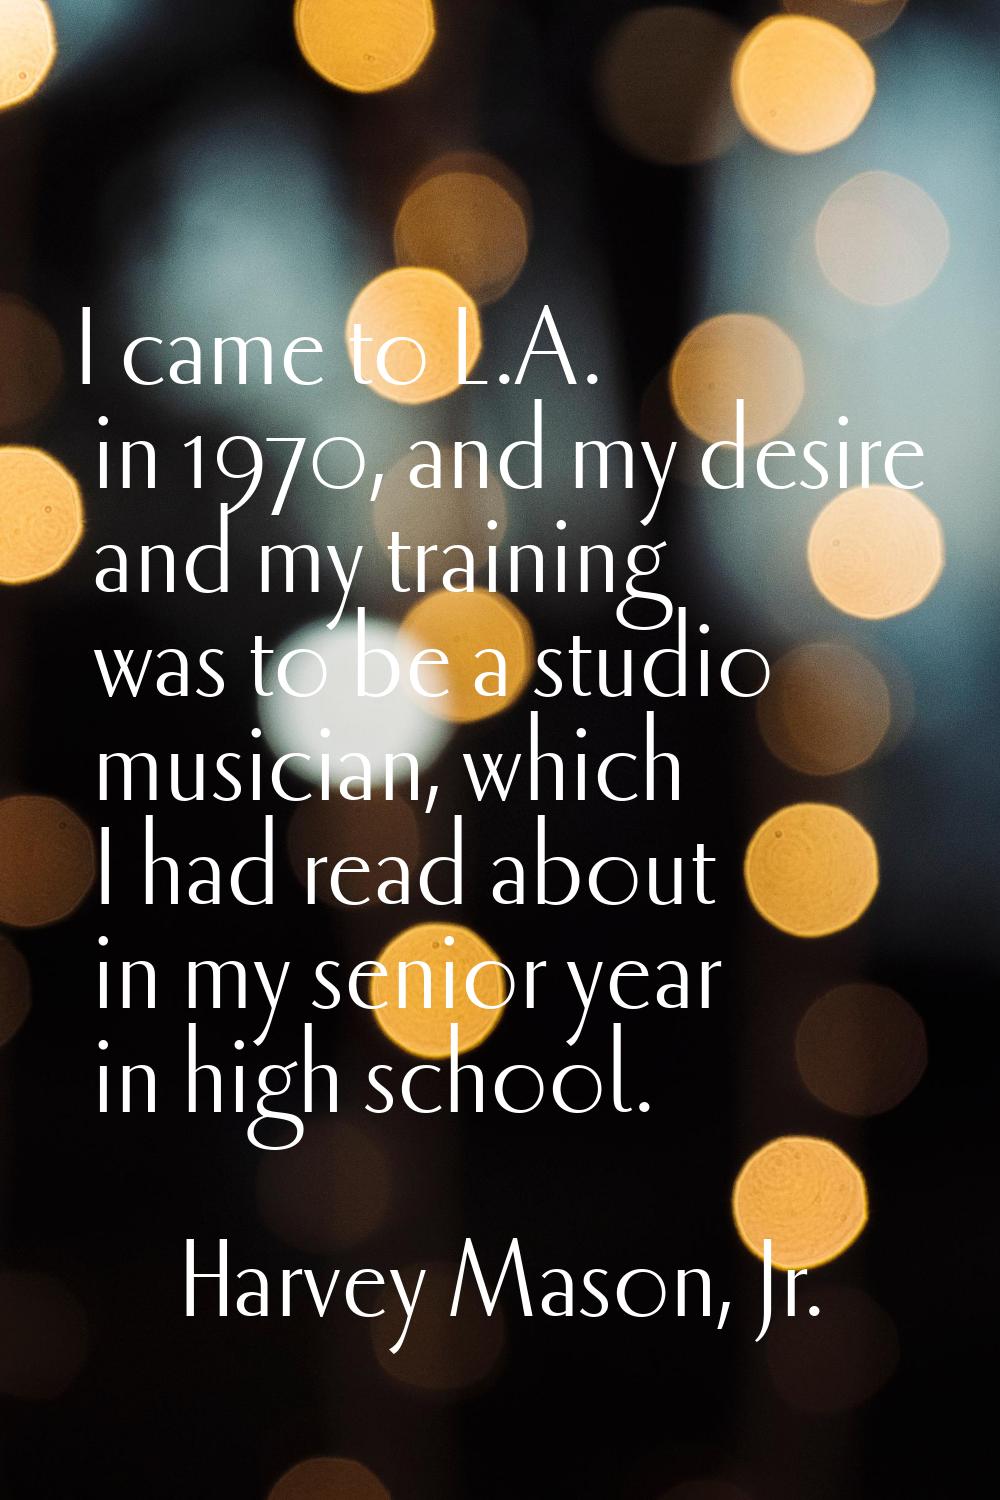 I came to L.A. in 1970, and my desire and my training was to be a studio musician, which I had read